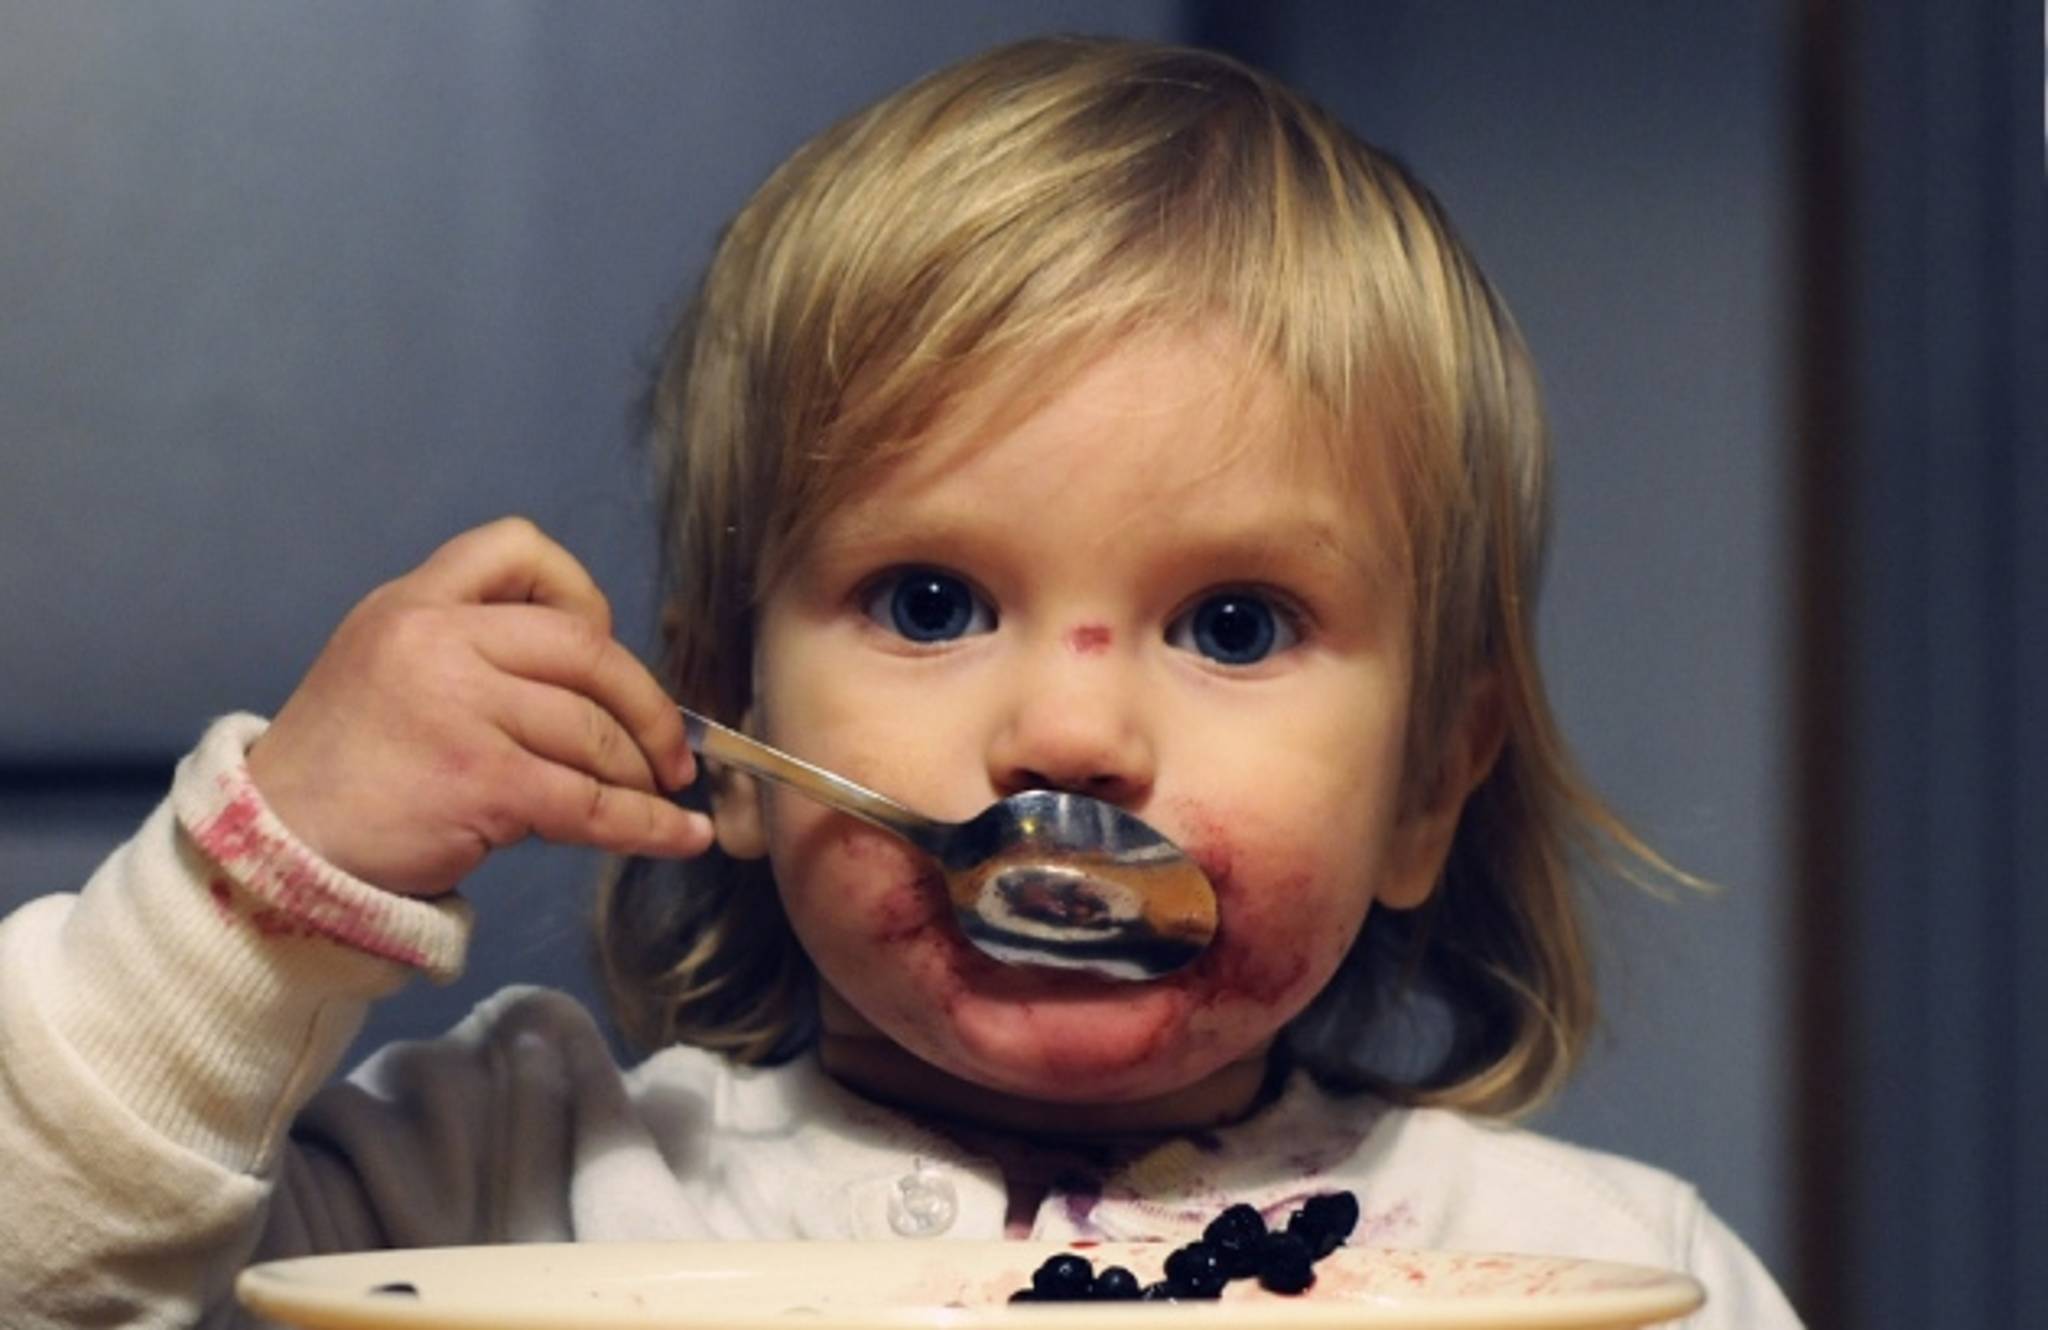 Making a meal of it: parents and kids' eating habits